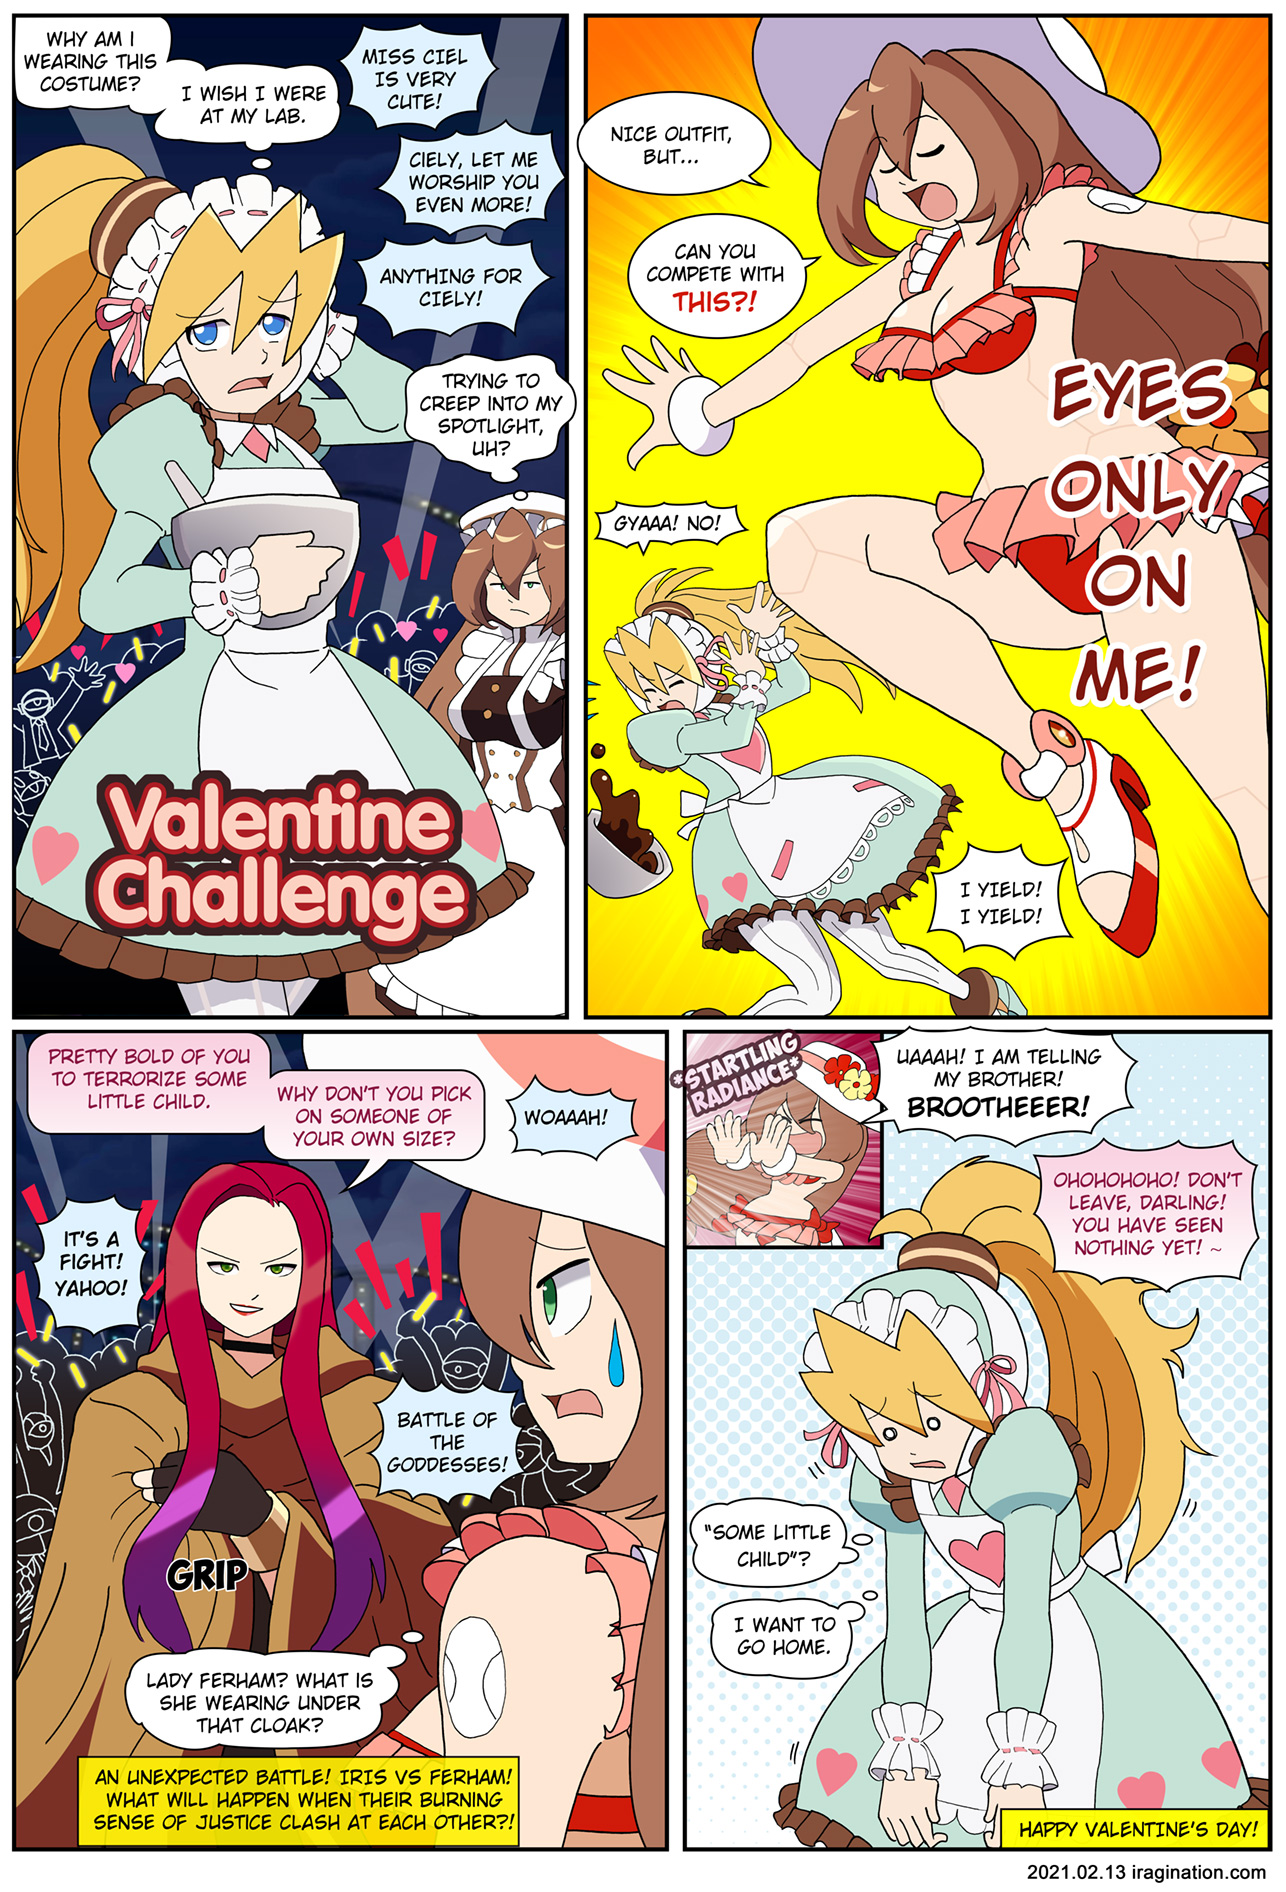 Valentine Challenge - Rockman X DiVE
Rockman X DiVE had a [url=https://www.facebook.com/CAPCOM.RXD/posts/699333750762717]Valentine event[/url], and someone decided to put these three ladies together, so after playing the event I could only think in some battle shonen skit. Is Iris awakening her dark side? Or perhaps was this just a one-off event?  Did she go too far?

This piece was a lot of fun. I had to take a lot of shortcuts to complete this work before the artificial deadline I came up with. It was more of a personal challenge and to practice some economy, so not only the layout and script are extremely simplified, but I also used mostly flat colors and did not complete other major finishing. I think it looks good enough for this kind of seasonal comic. What do you think? Should I revise this and add more colors? I can't possibly expand on the story details. I will leave that to your own imagination!

Here is hoping Ciel gets her voice one day.

Keywords: iris ciel ferham